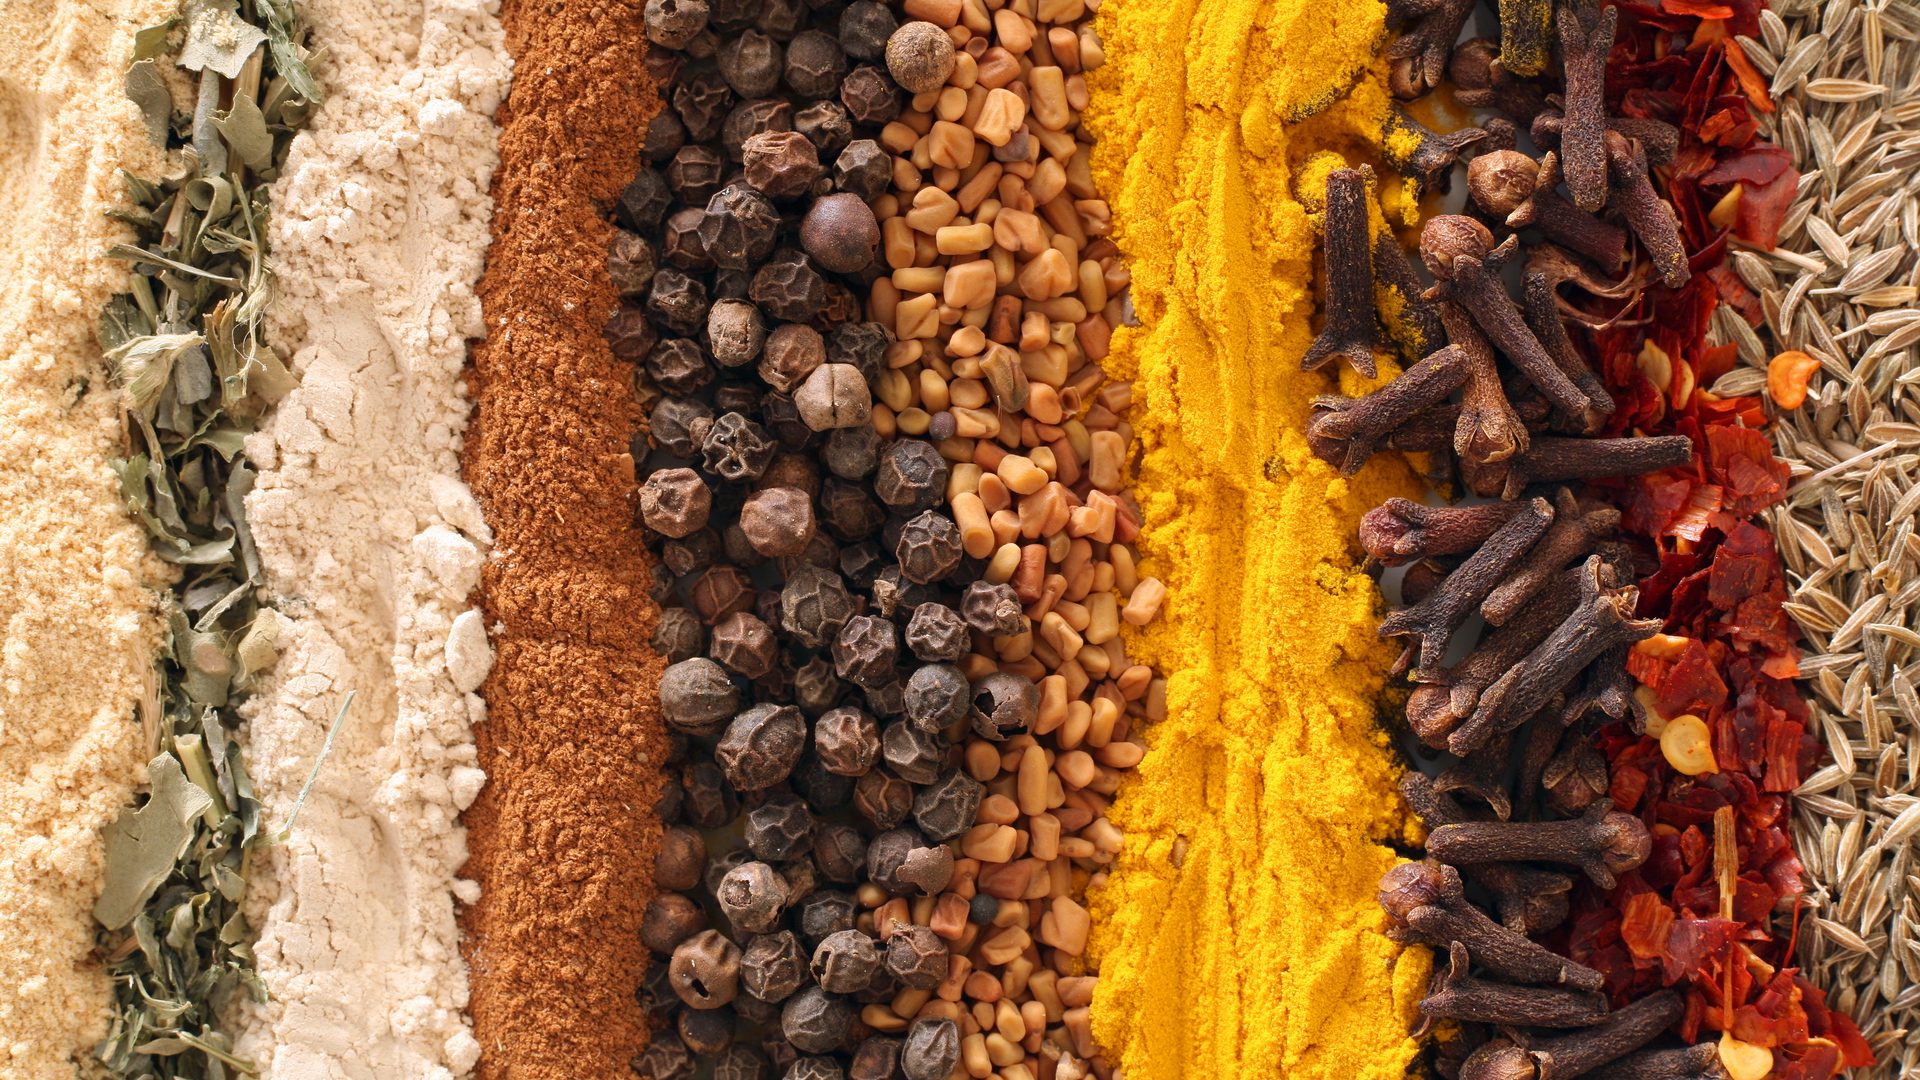 Curry spices